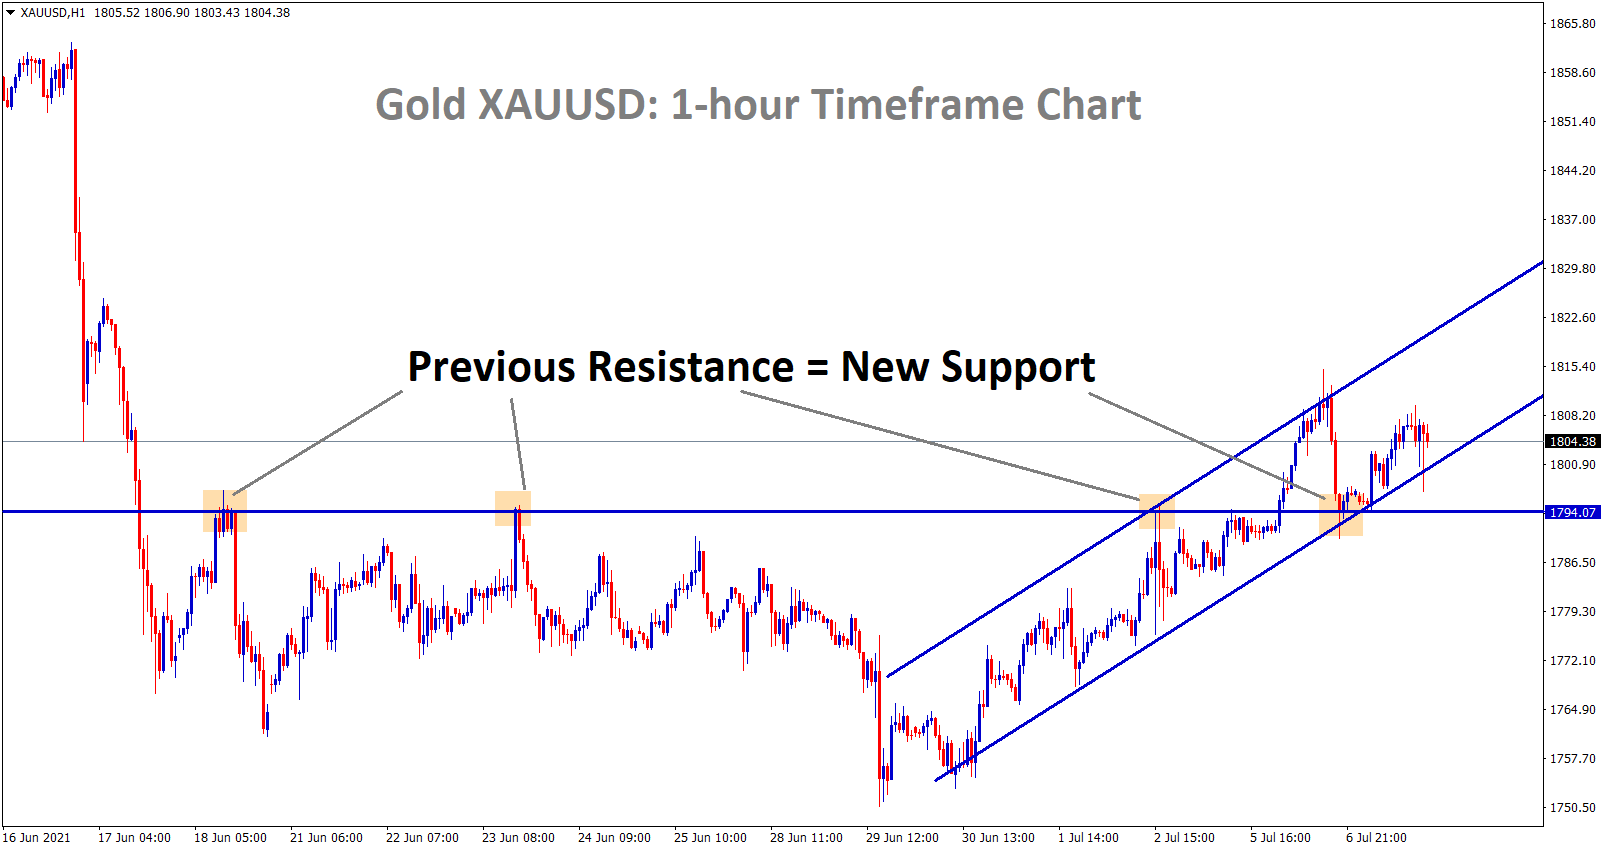 Gold XAUUSD is moving in an uptrend and the previous resistance acting now as a new support level